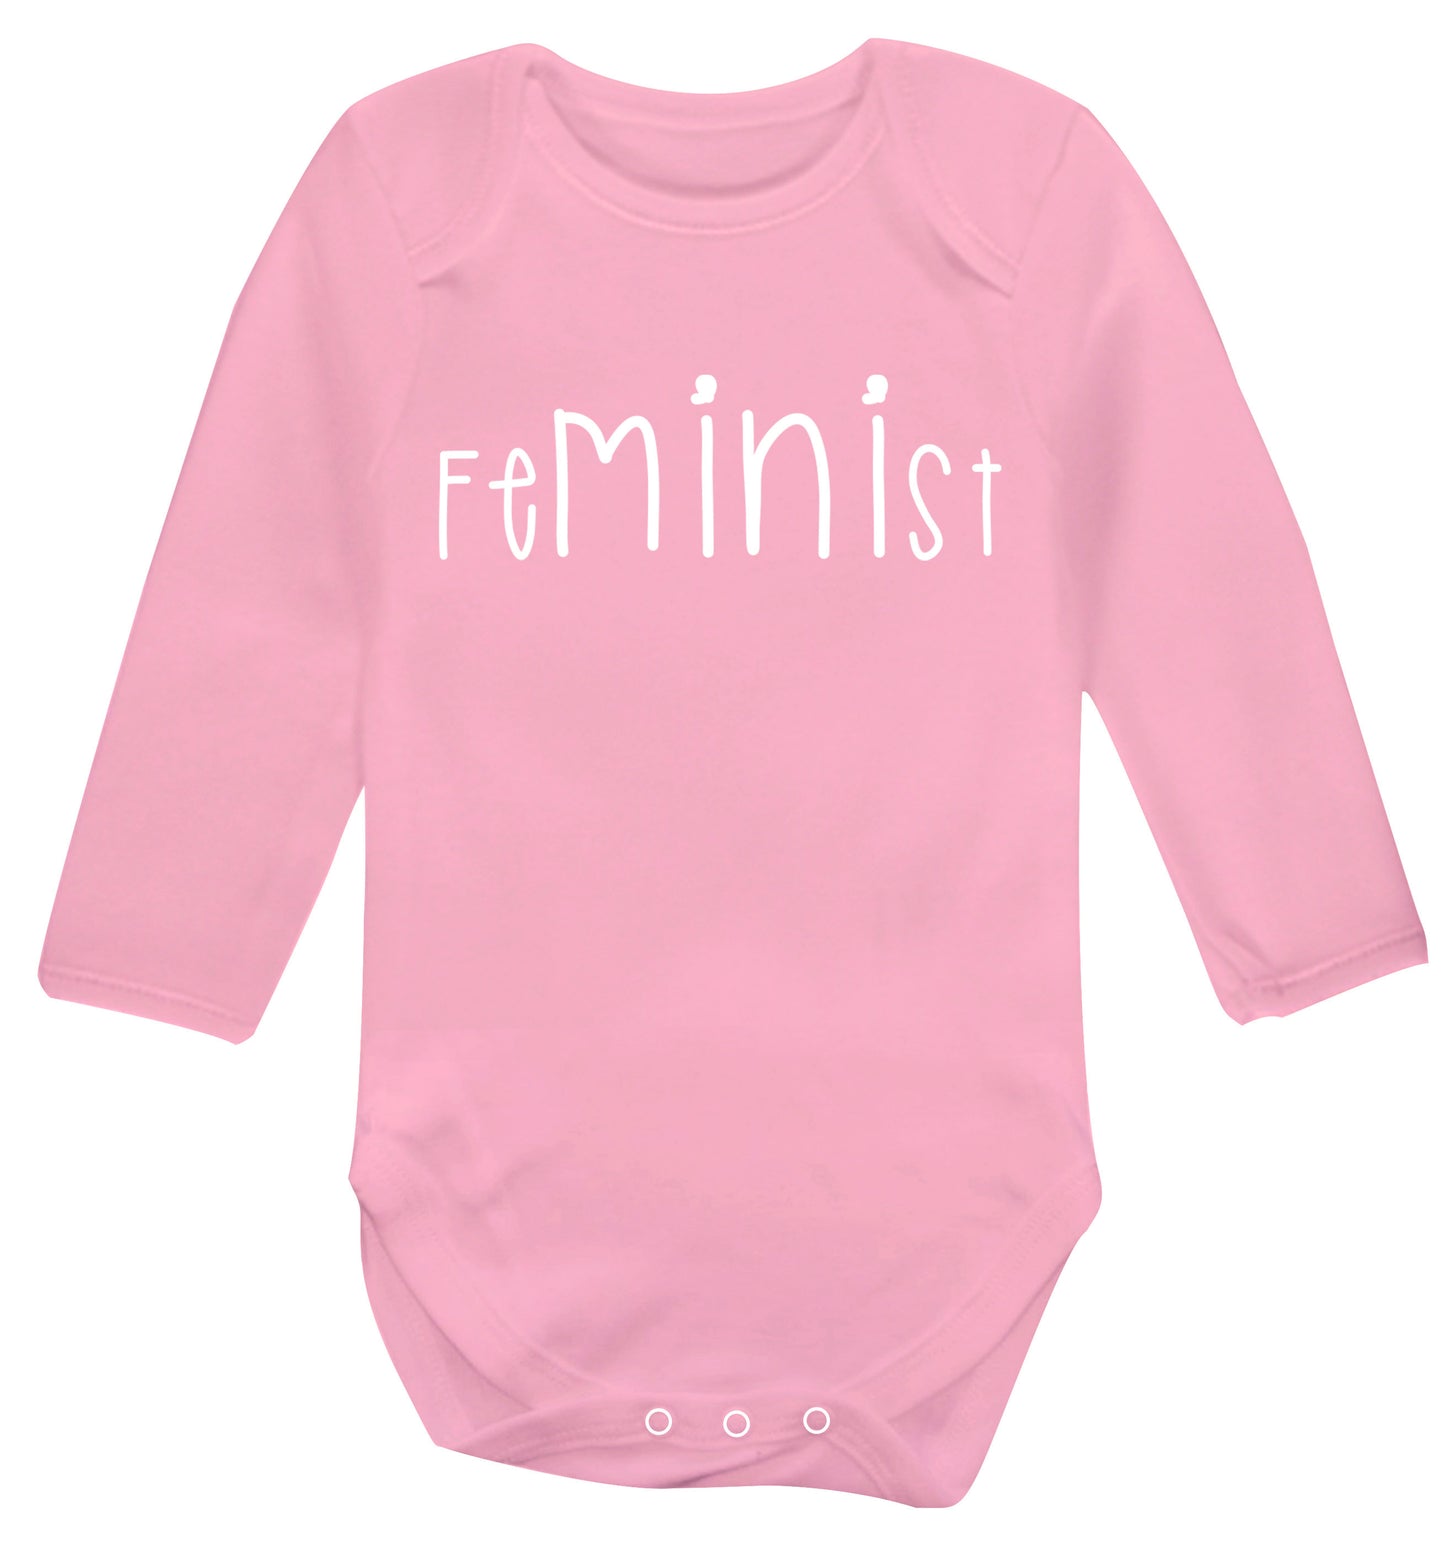 FeMINIst Baby Vest long sleeved pale pink 6-12 months